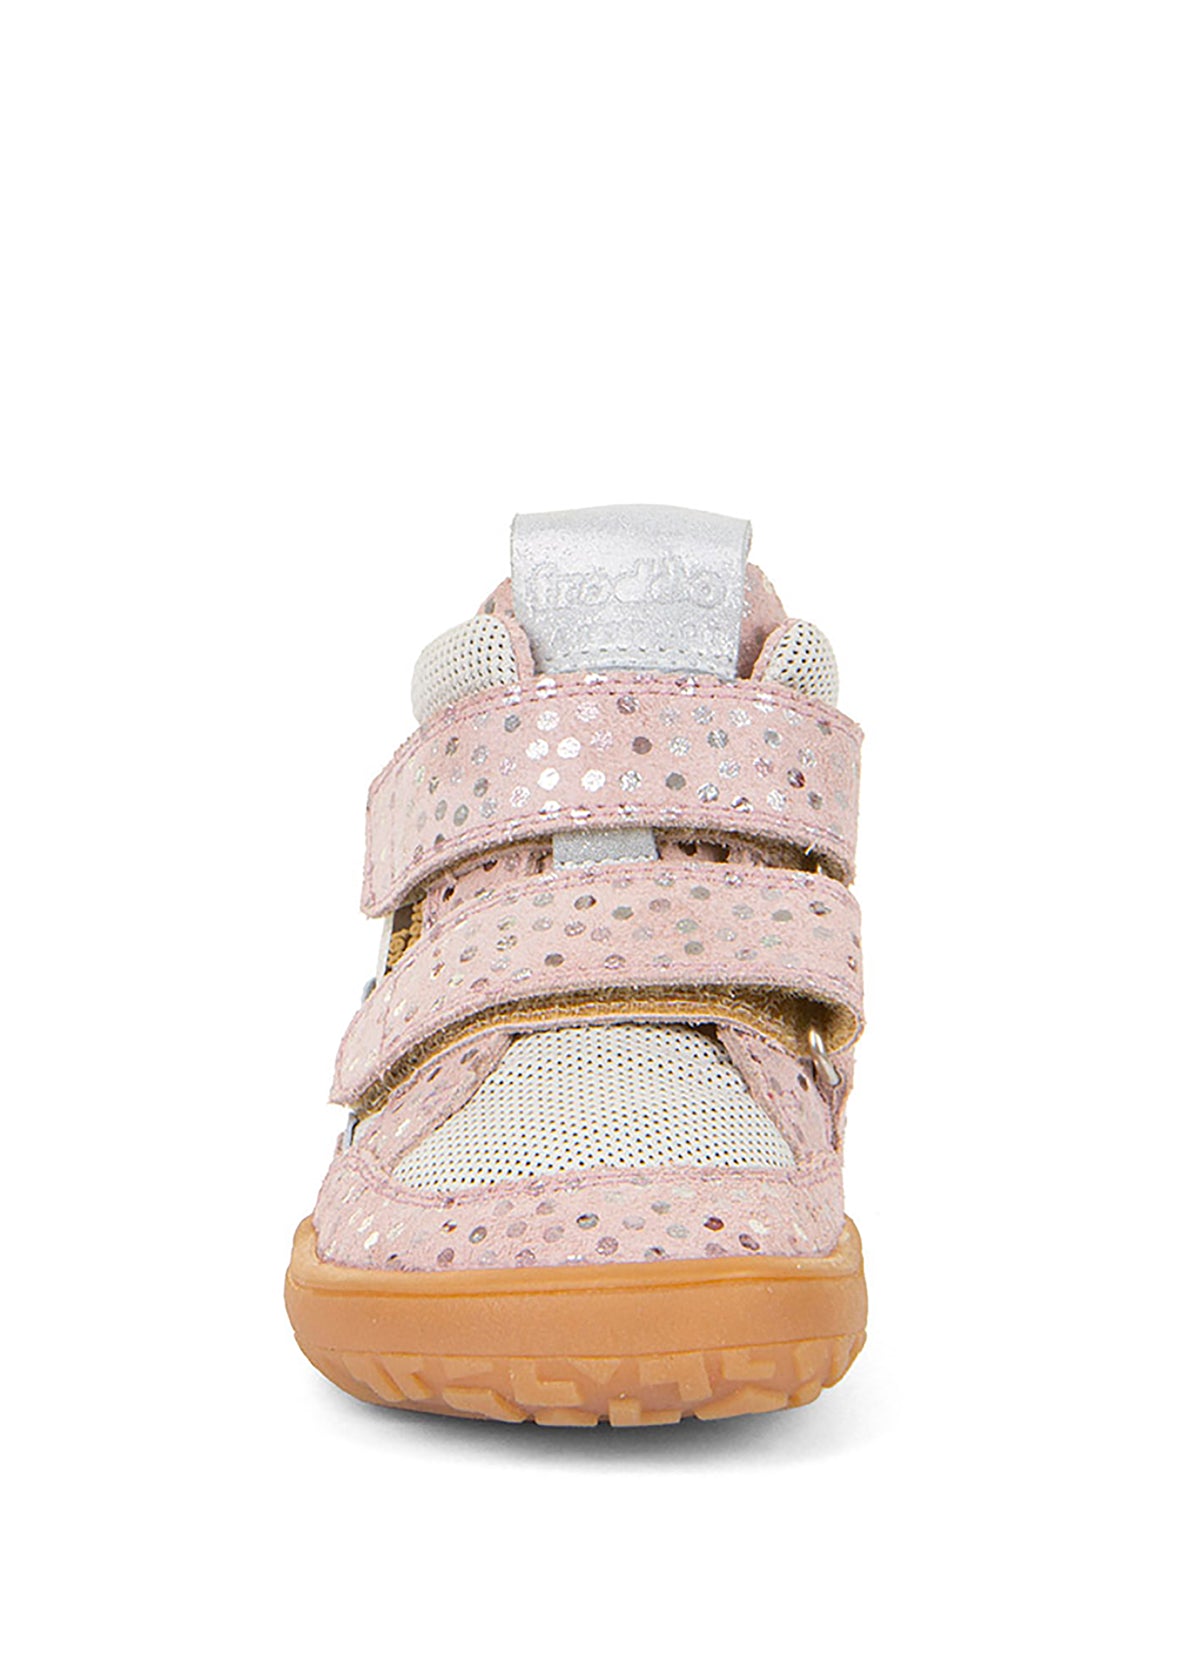 Barefoot sneakers with handles - mid-season shoes, Spring-TEX, sparkling pink